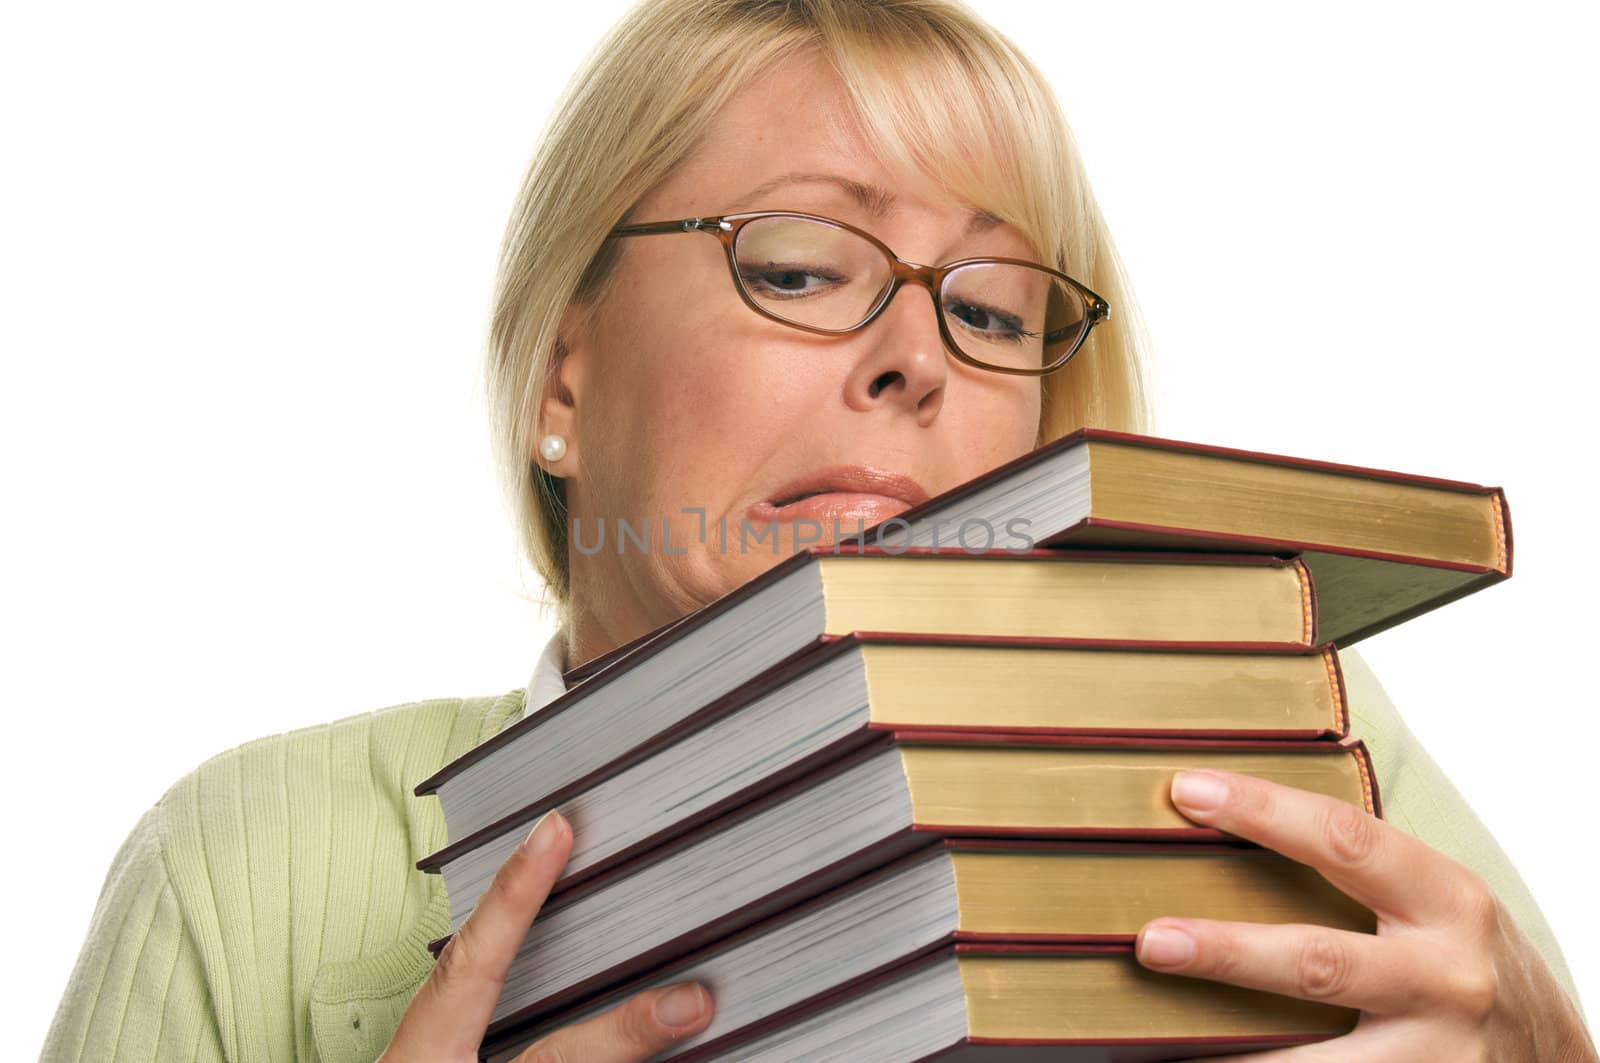 Attractive Student Struggles with Her Books Isolated on a White Background.